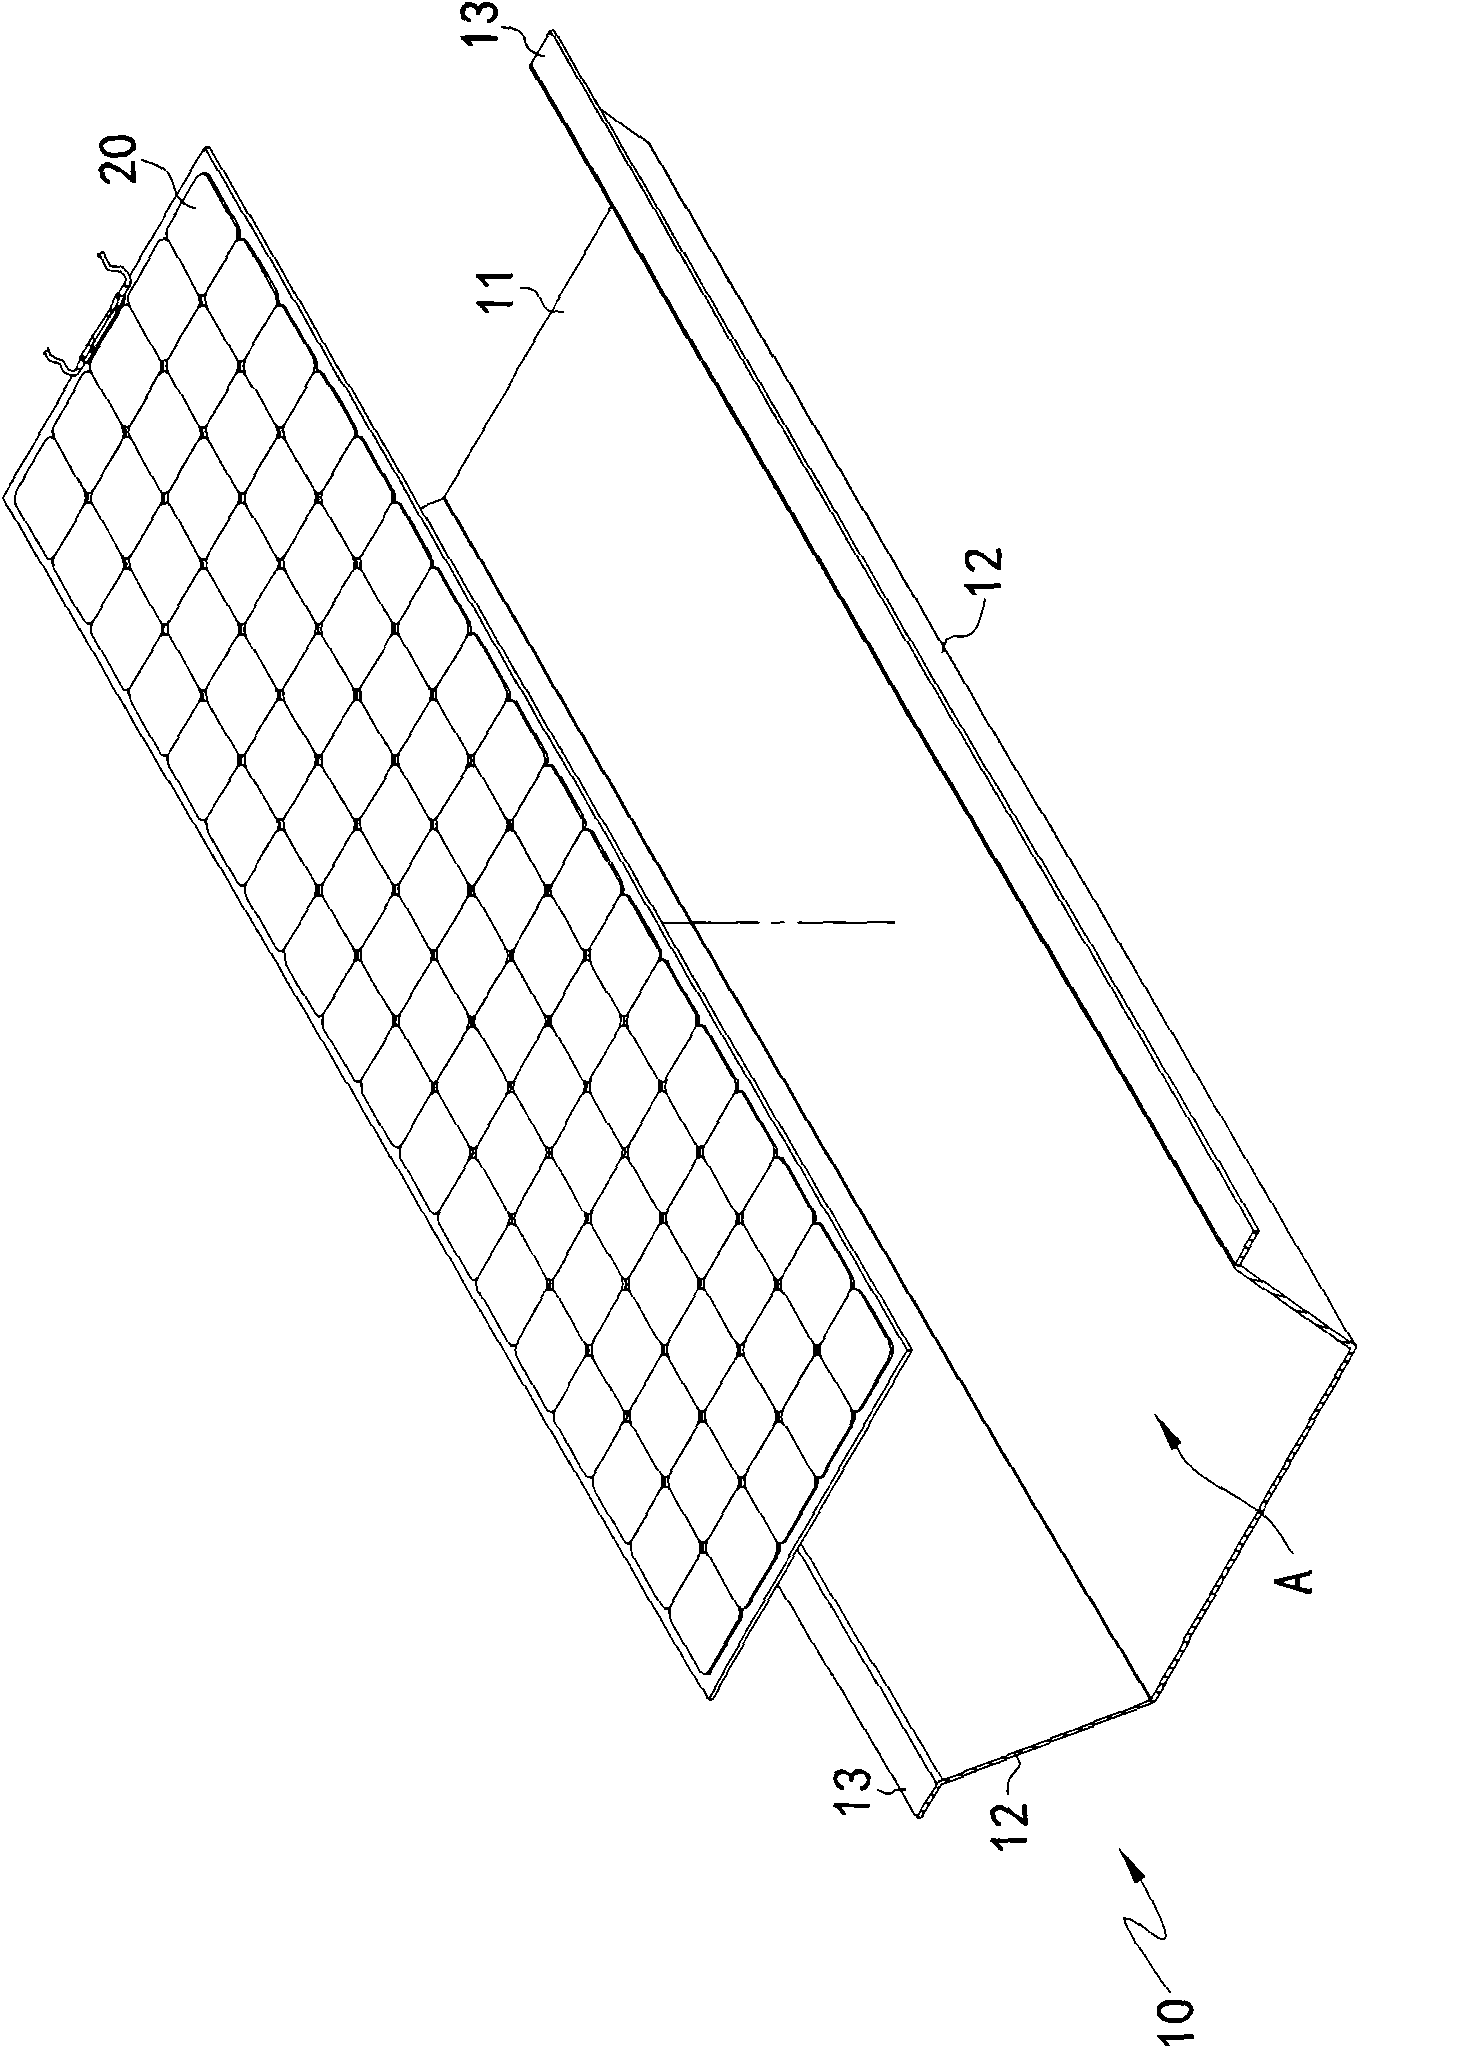 Wave plate structure with solar panel